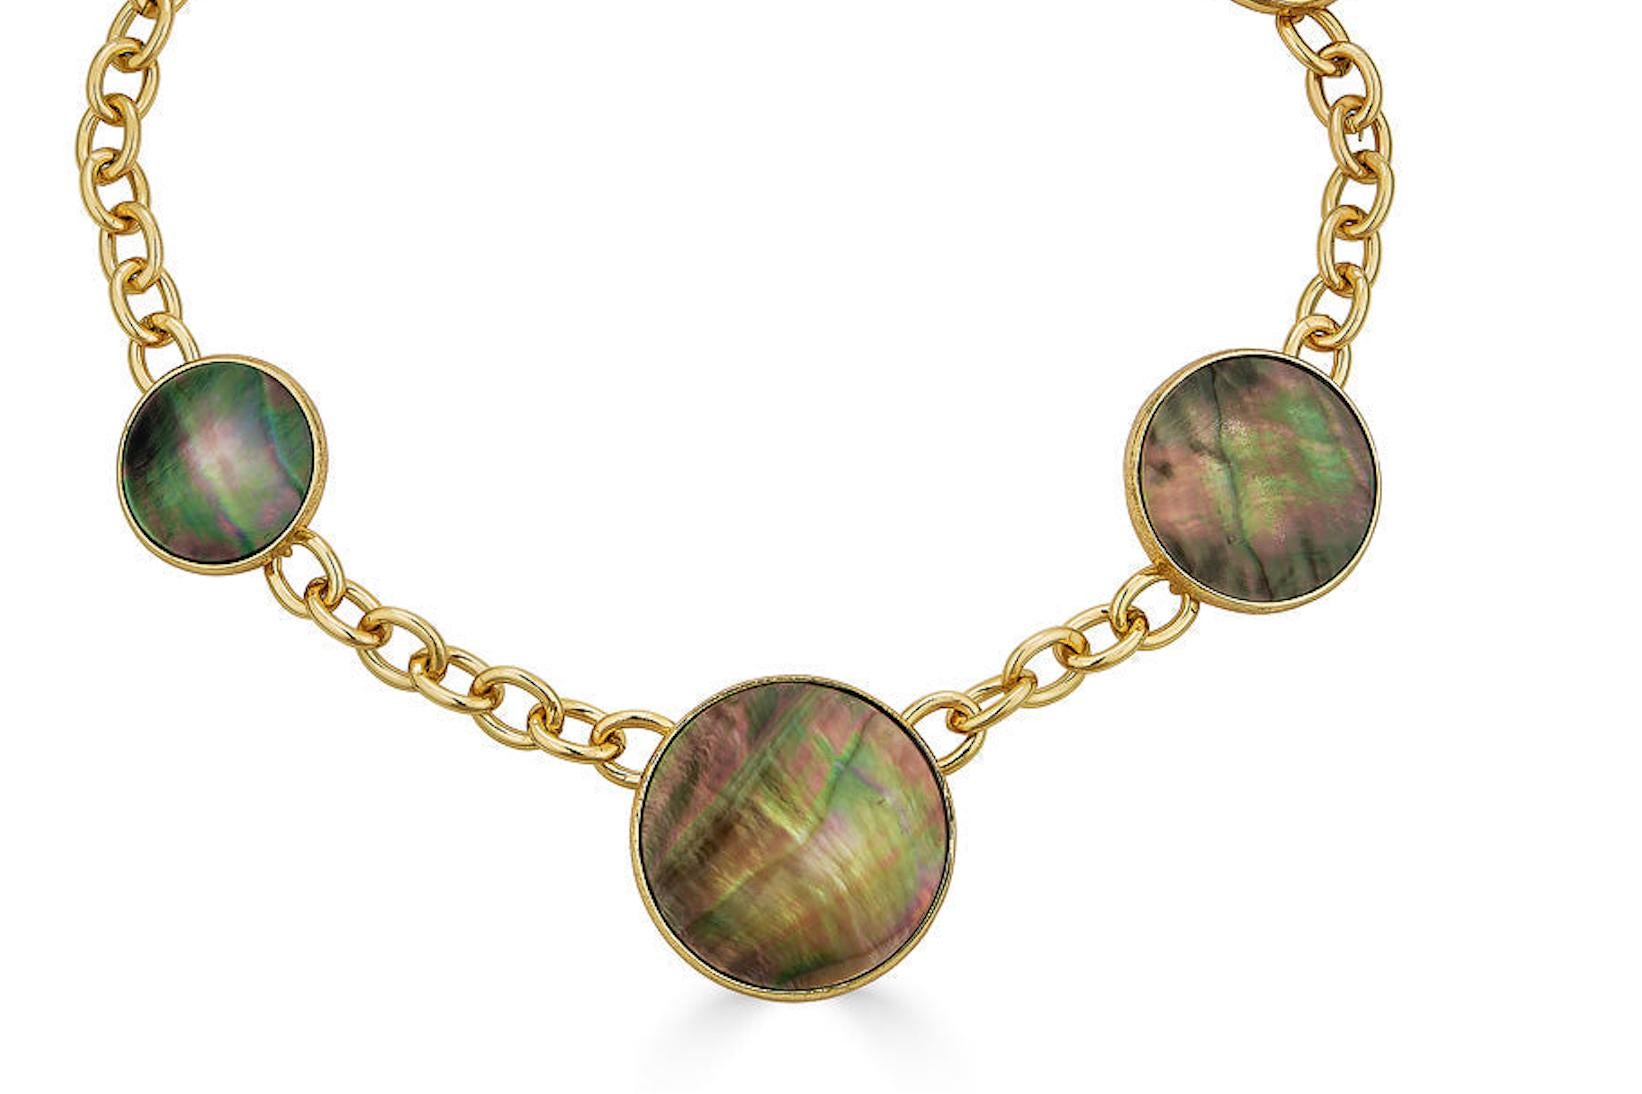 abalone pearl necklace